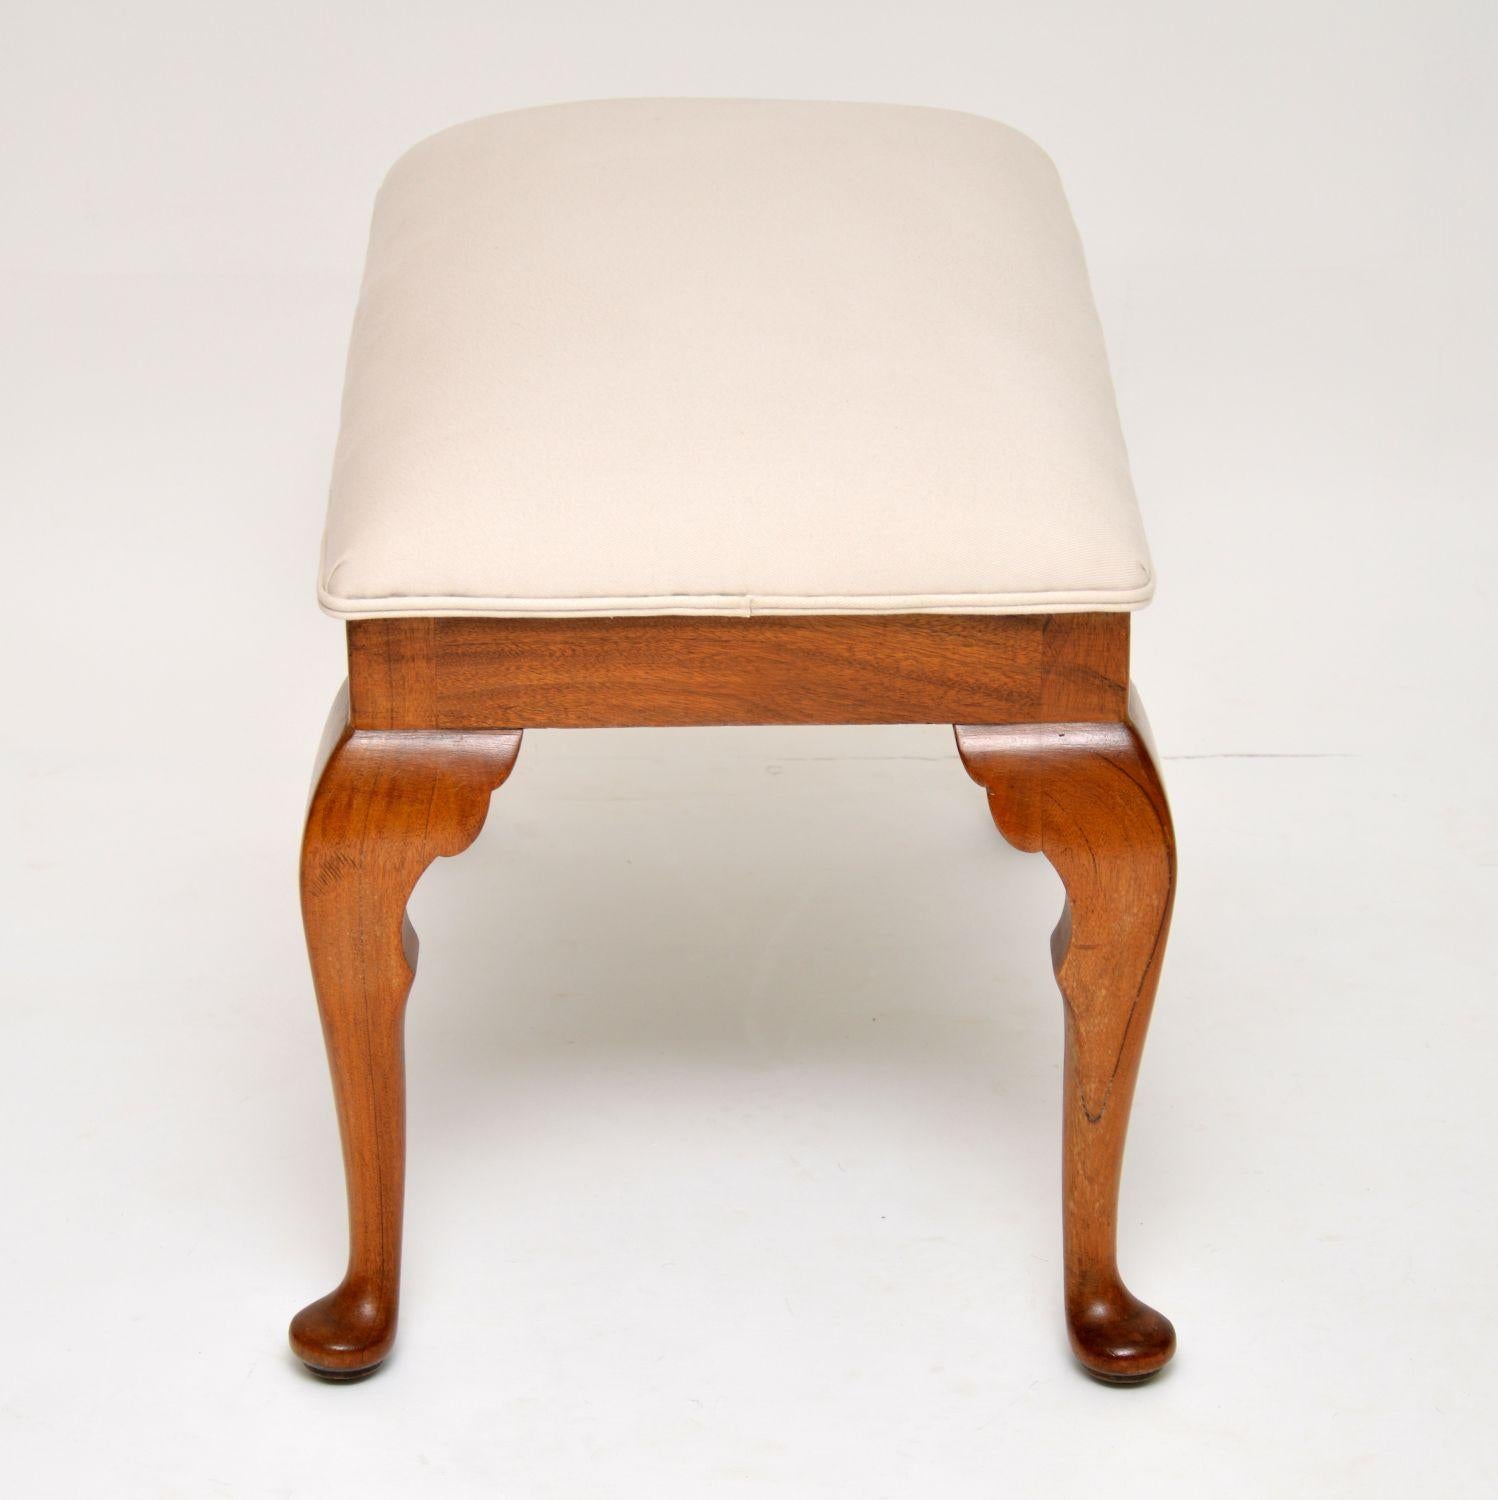 Antique solid walnut Queen Anne style stool in excellent condition, dating from circa 1910s-1920s period. It’s just been French polished and re-upholstered in our regular cream cotton linen fabric.

Measures: Width 28 inches, 70 cm
Depth 17